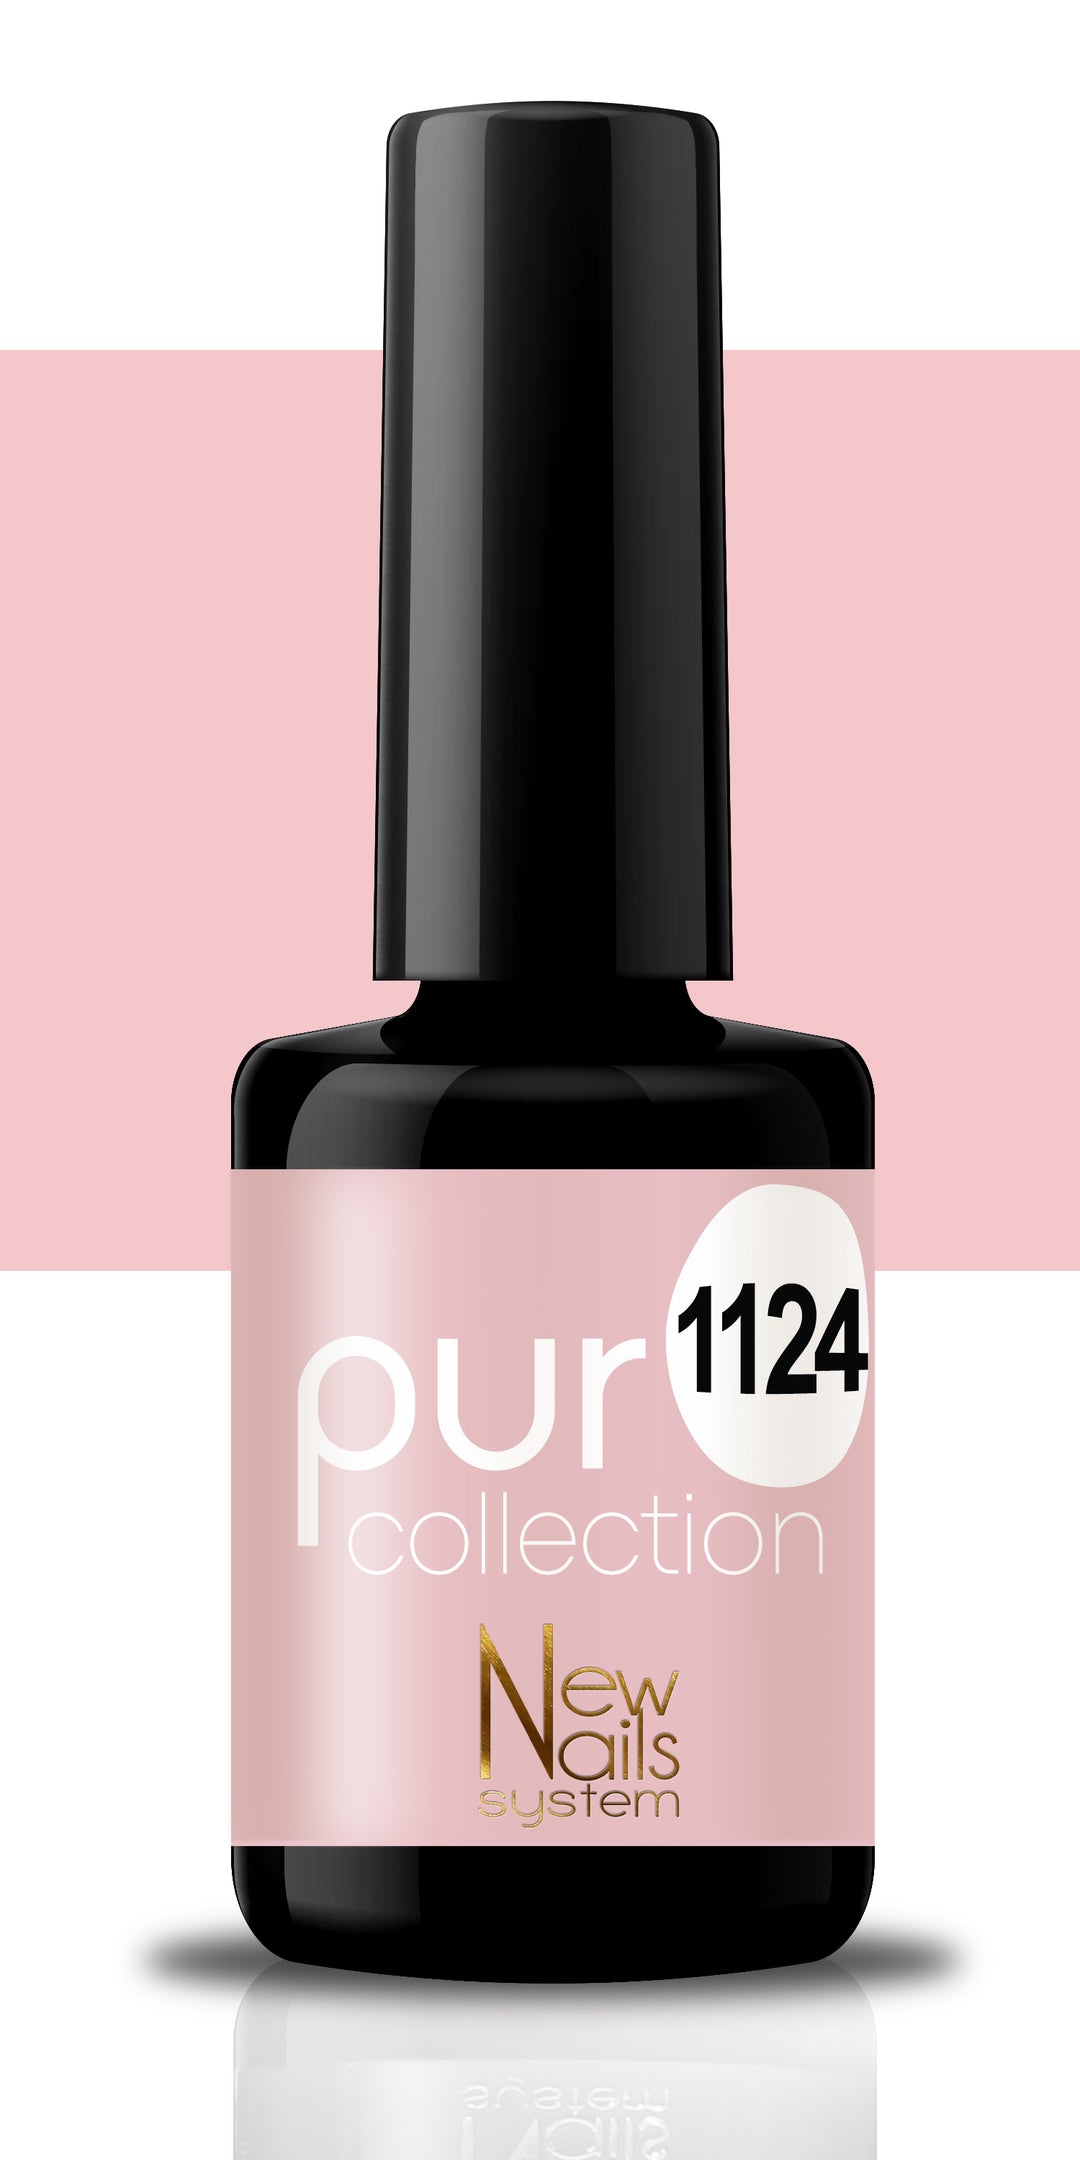 Puro collection Scent of Roses 1124 color gel polish 5ml